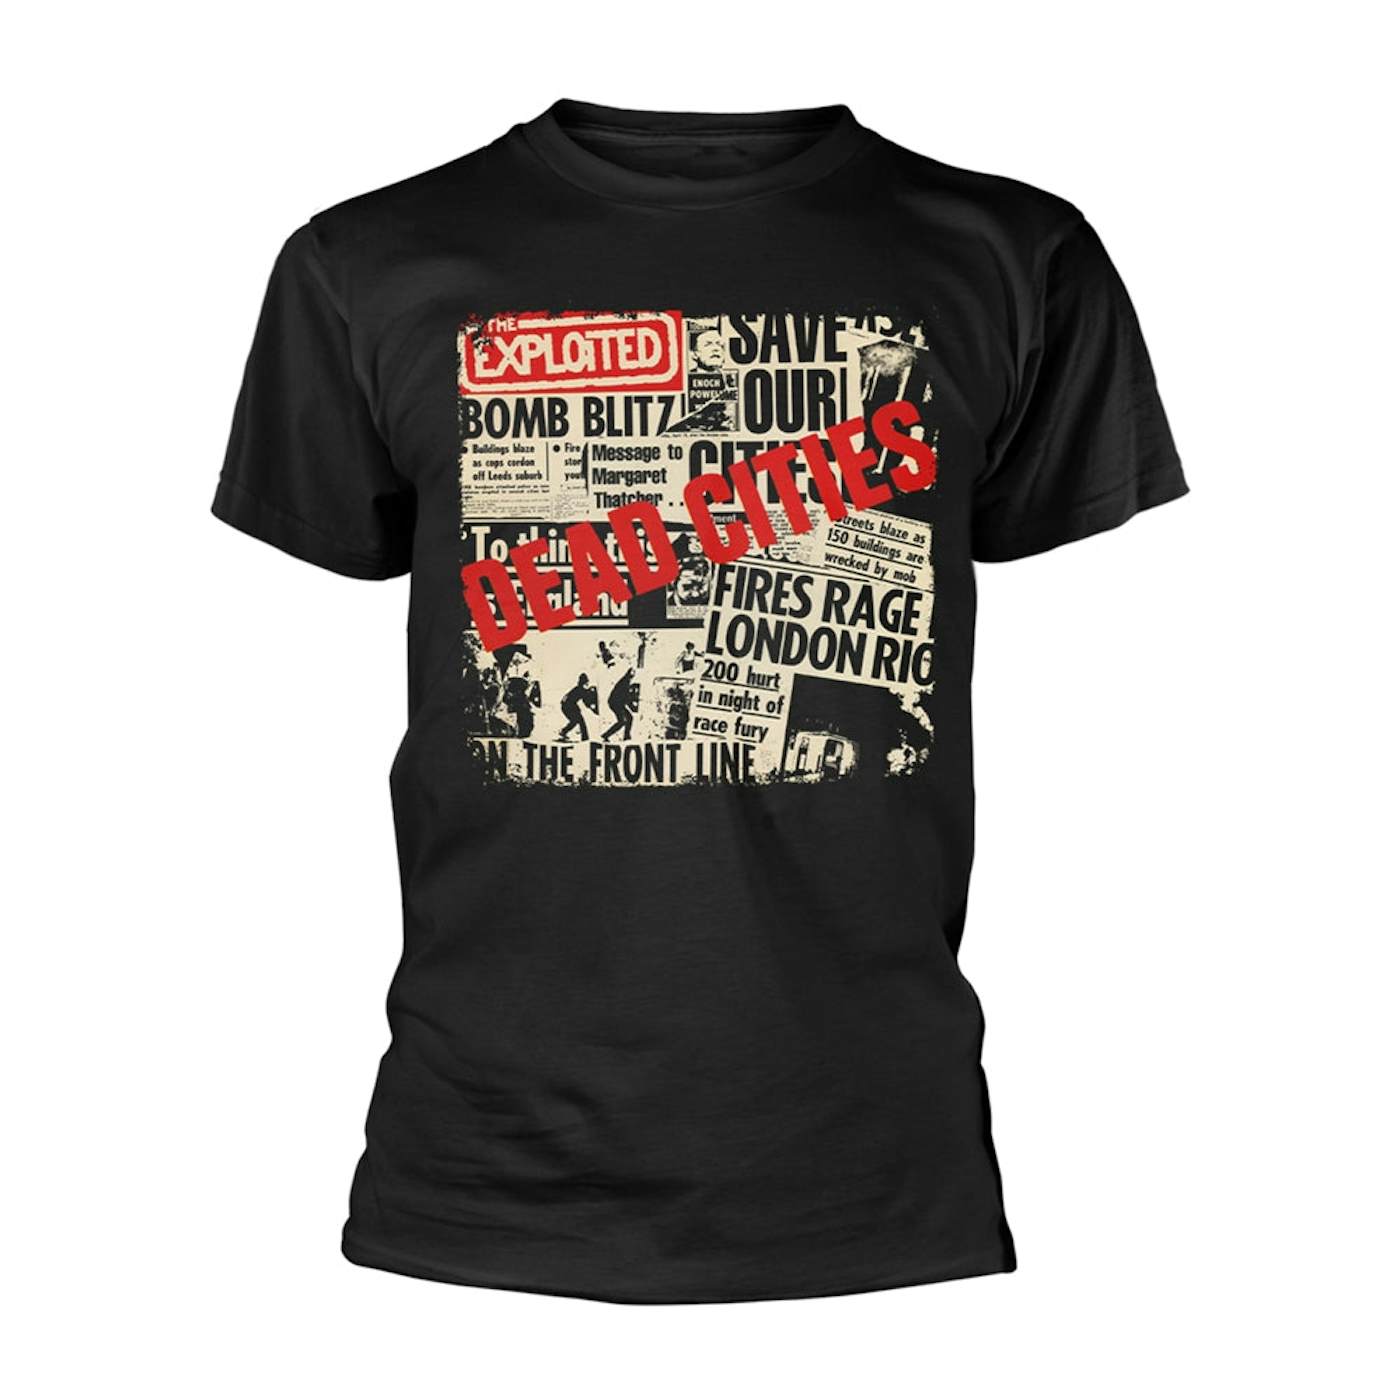 The Exploited T Shirt - Dead Cities